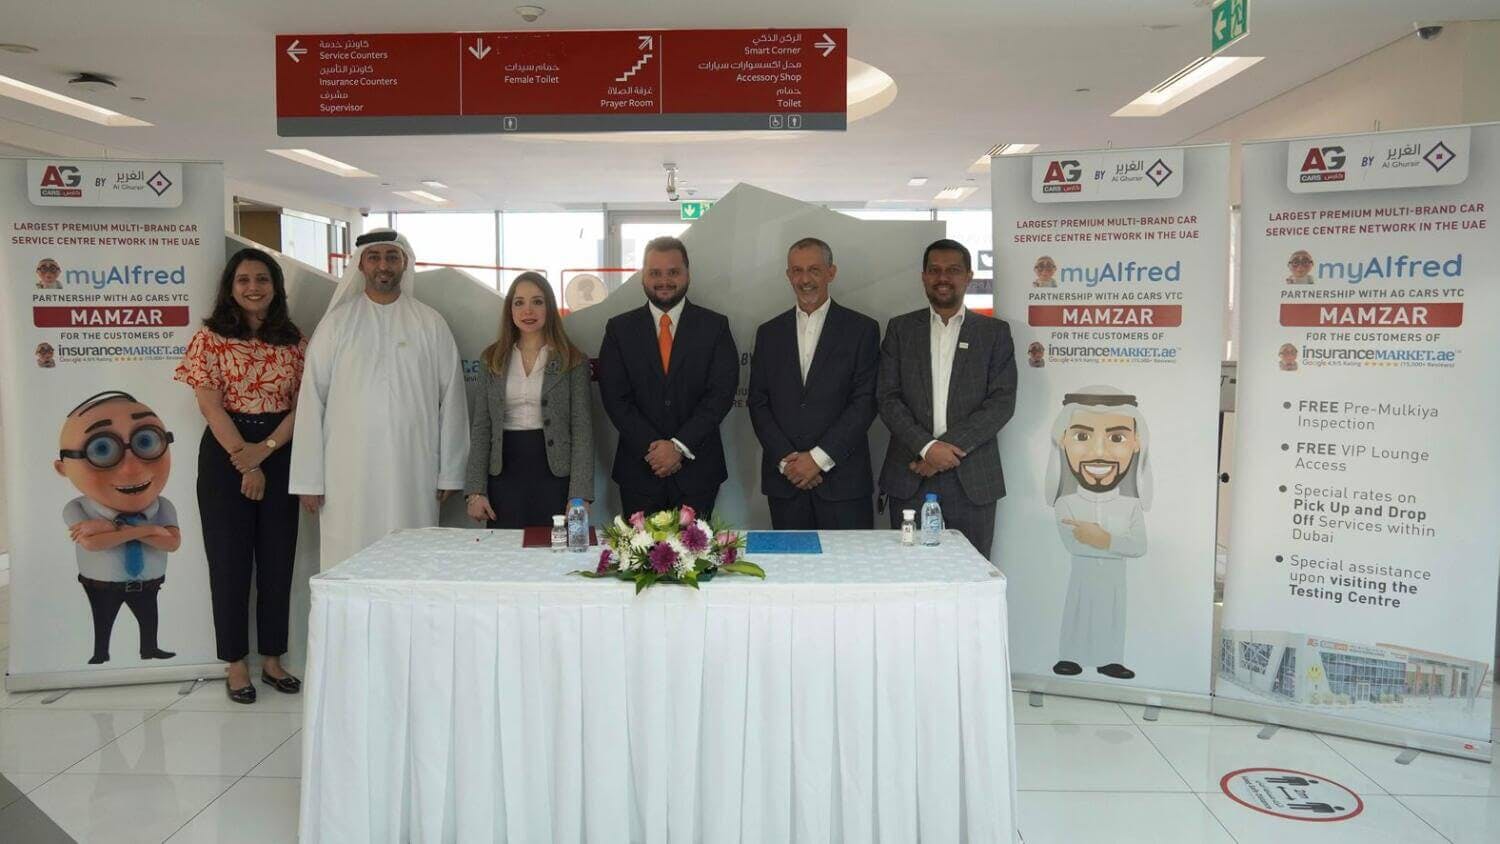 InsuranceMarket.ae 'motoring' ahead with another prestigious partnership